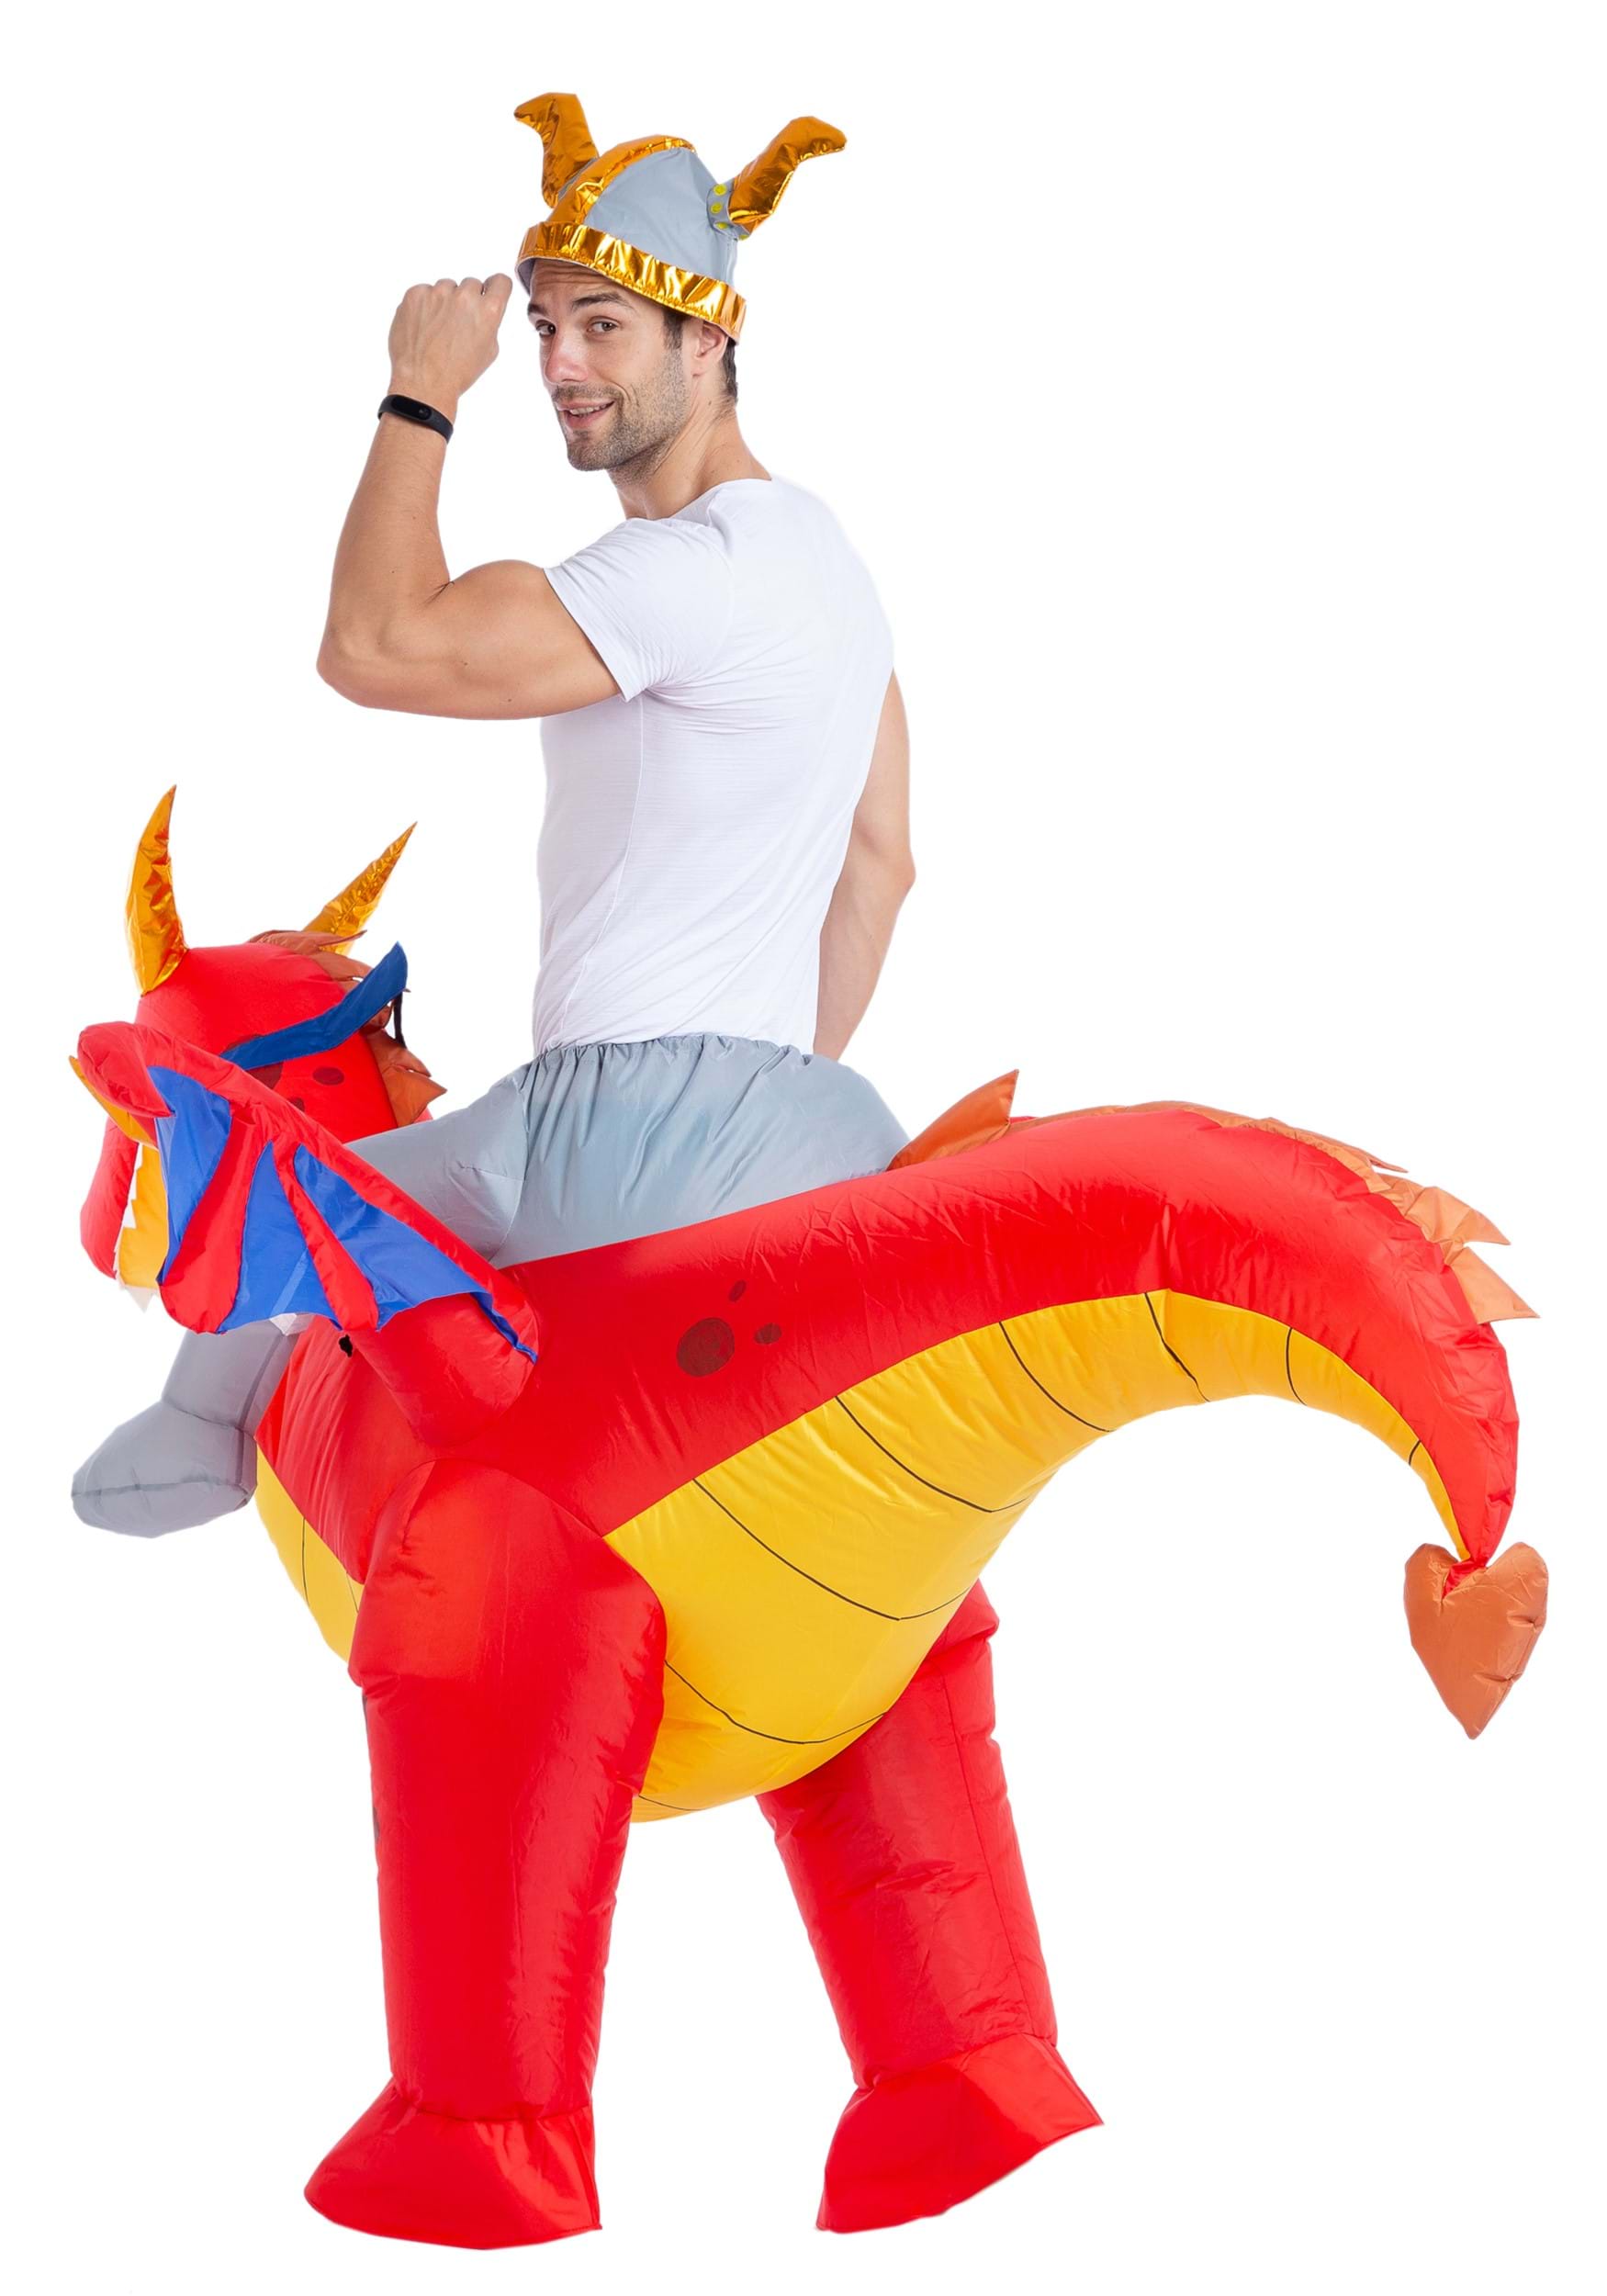 Inflatable Adult Riding-A-Fire Dragon Fancy Dress Costume